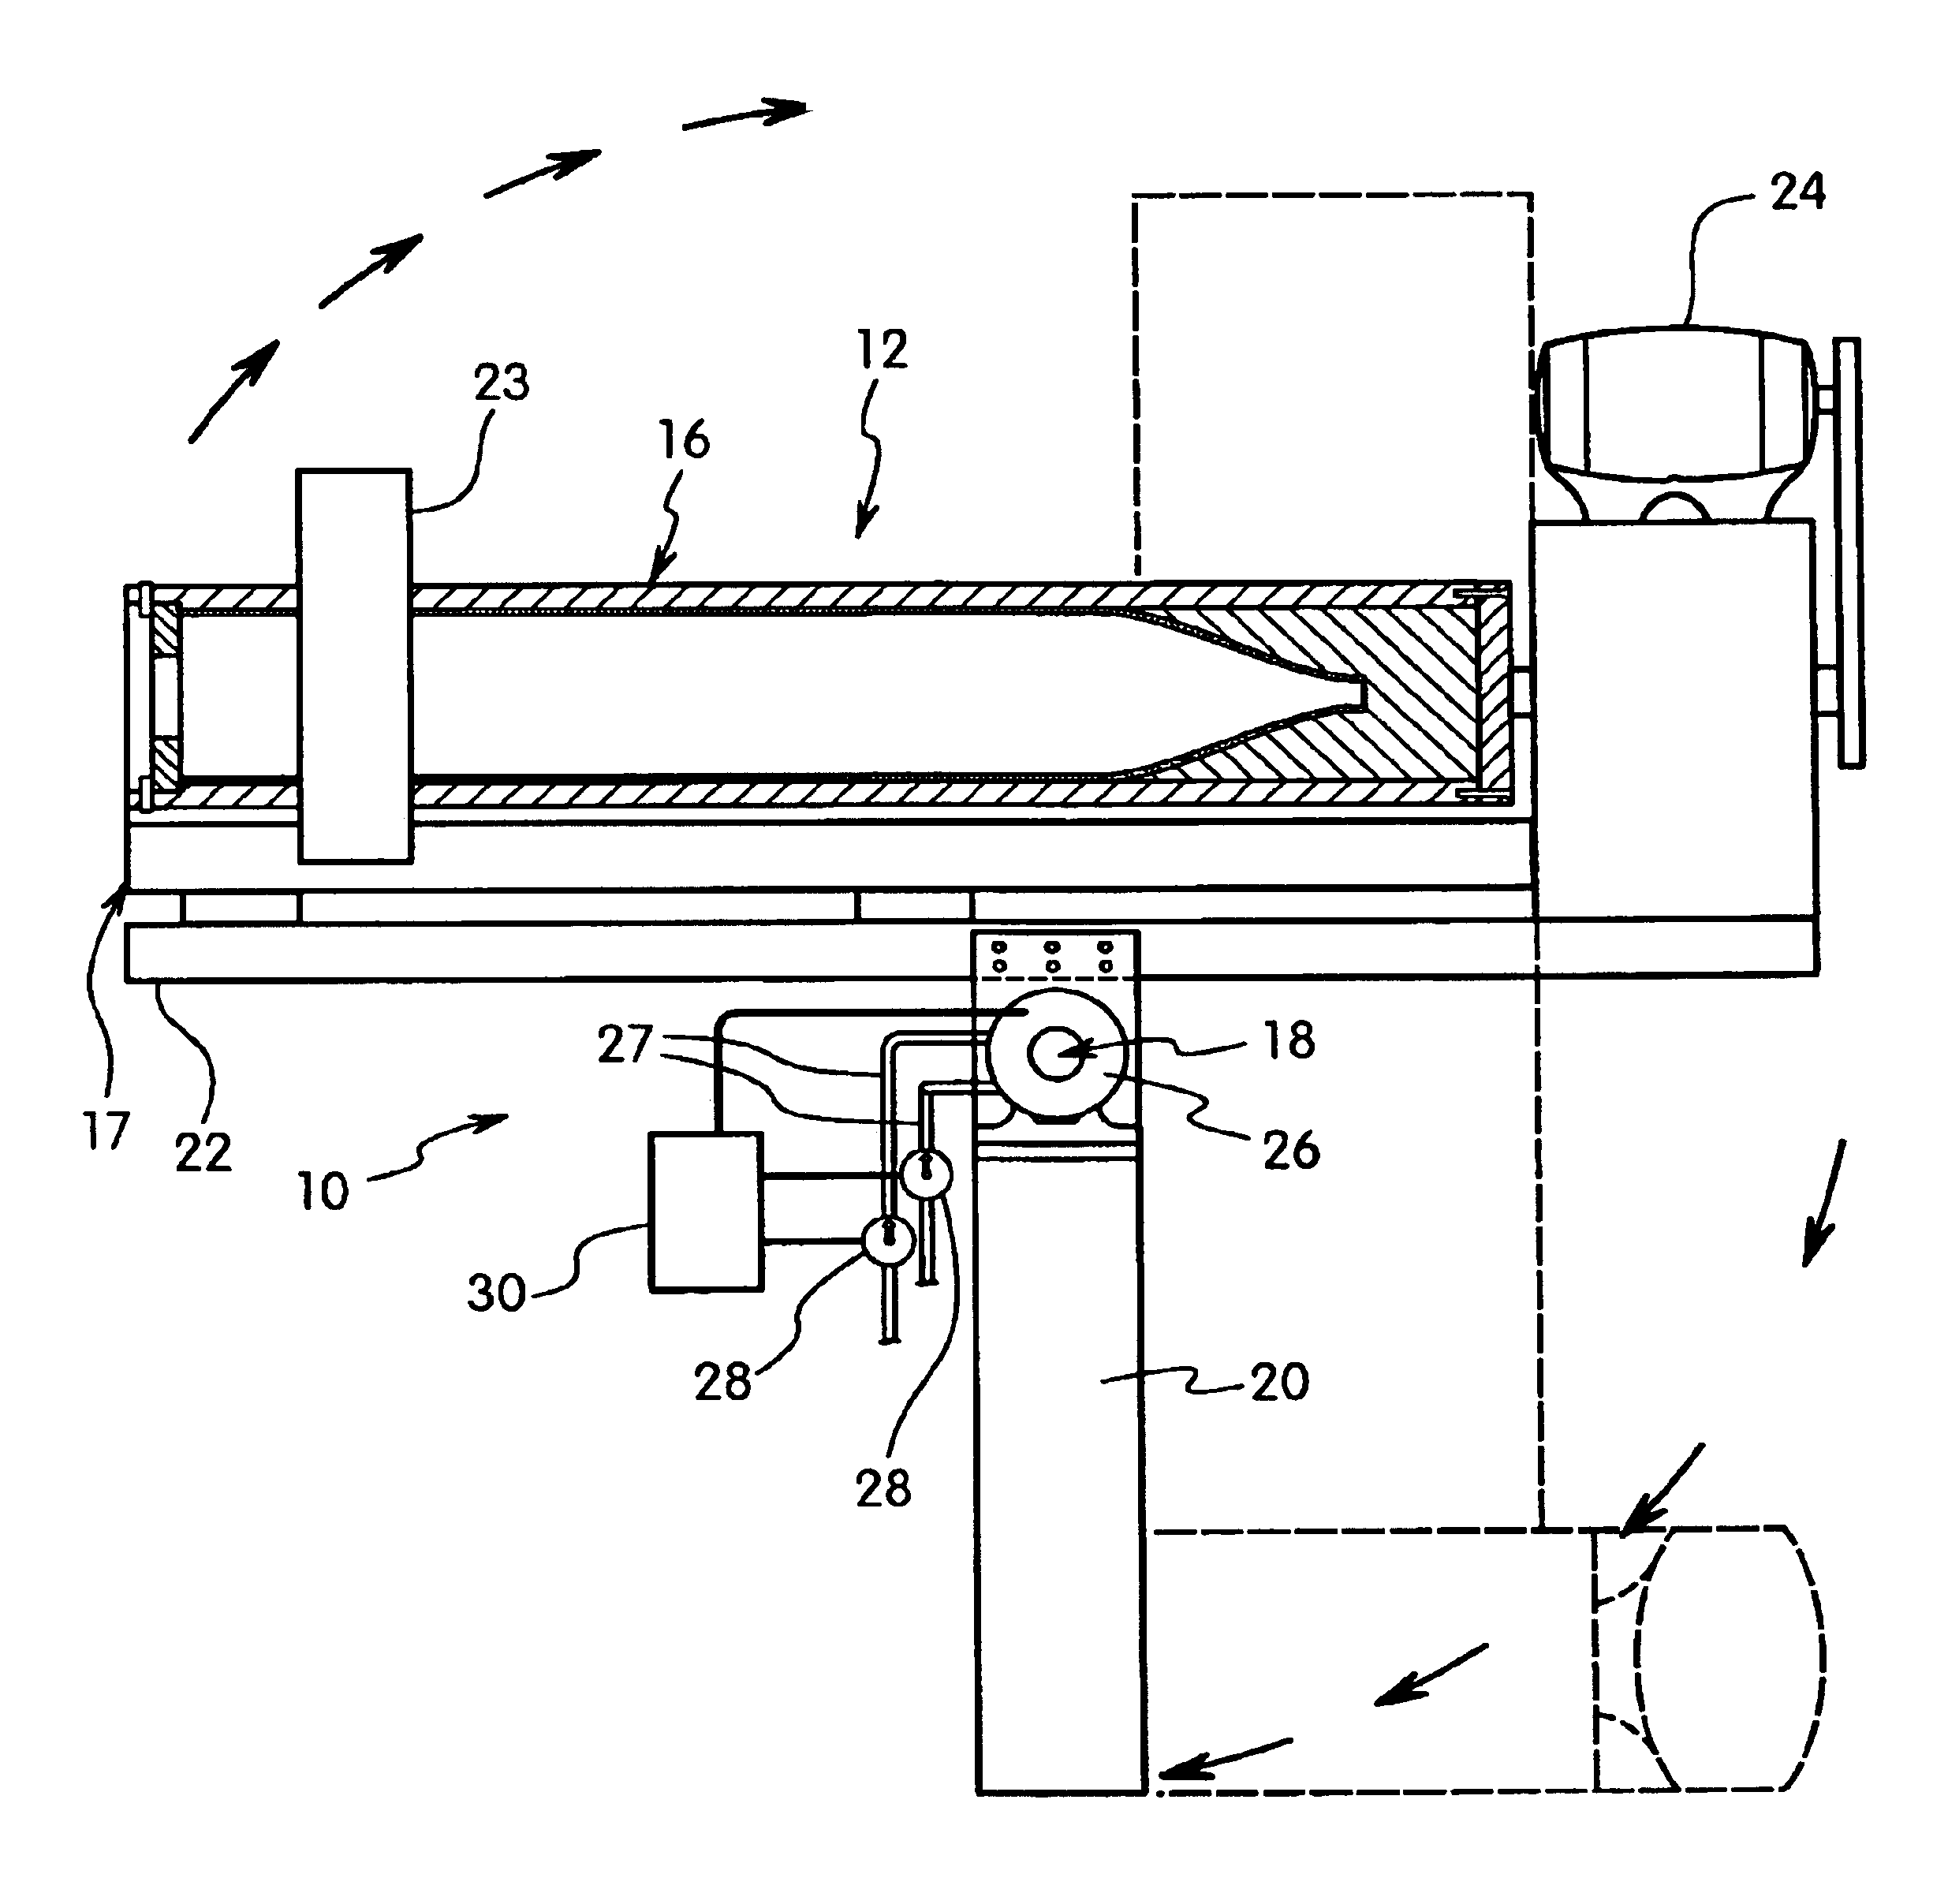 Method and apparatus for centrifugal casting of metal